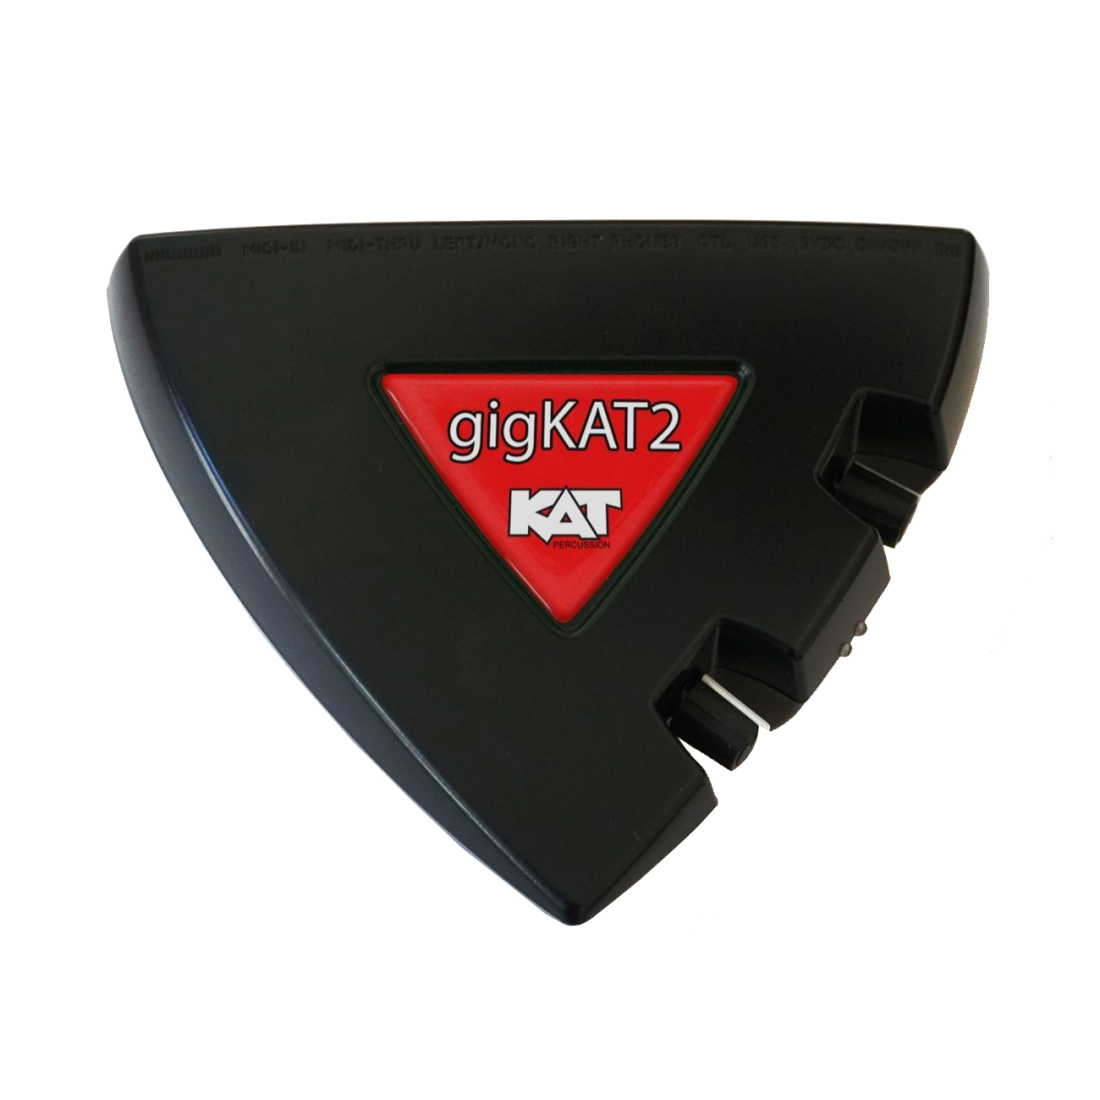 gigKAT2 Sound Module for Controllers